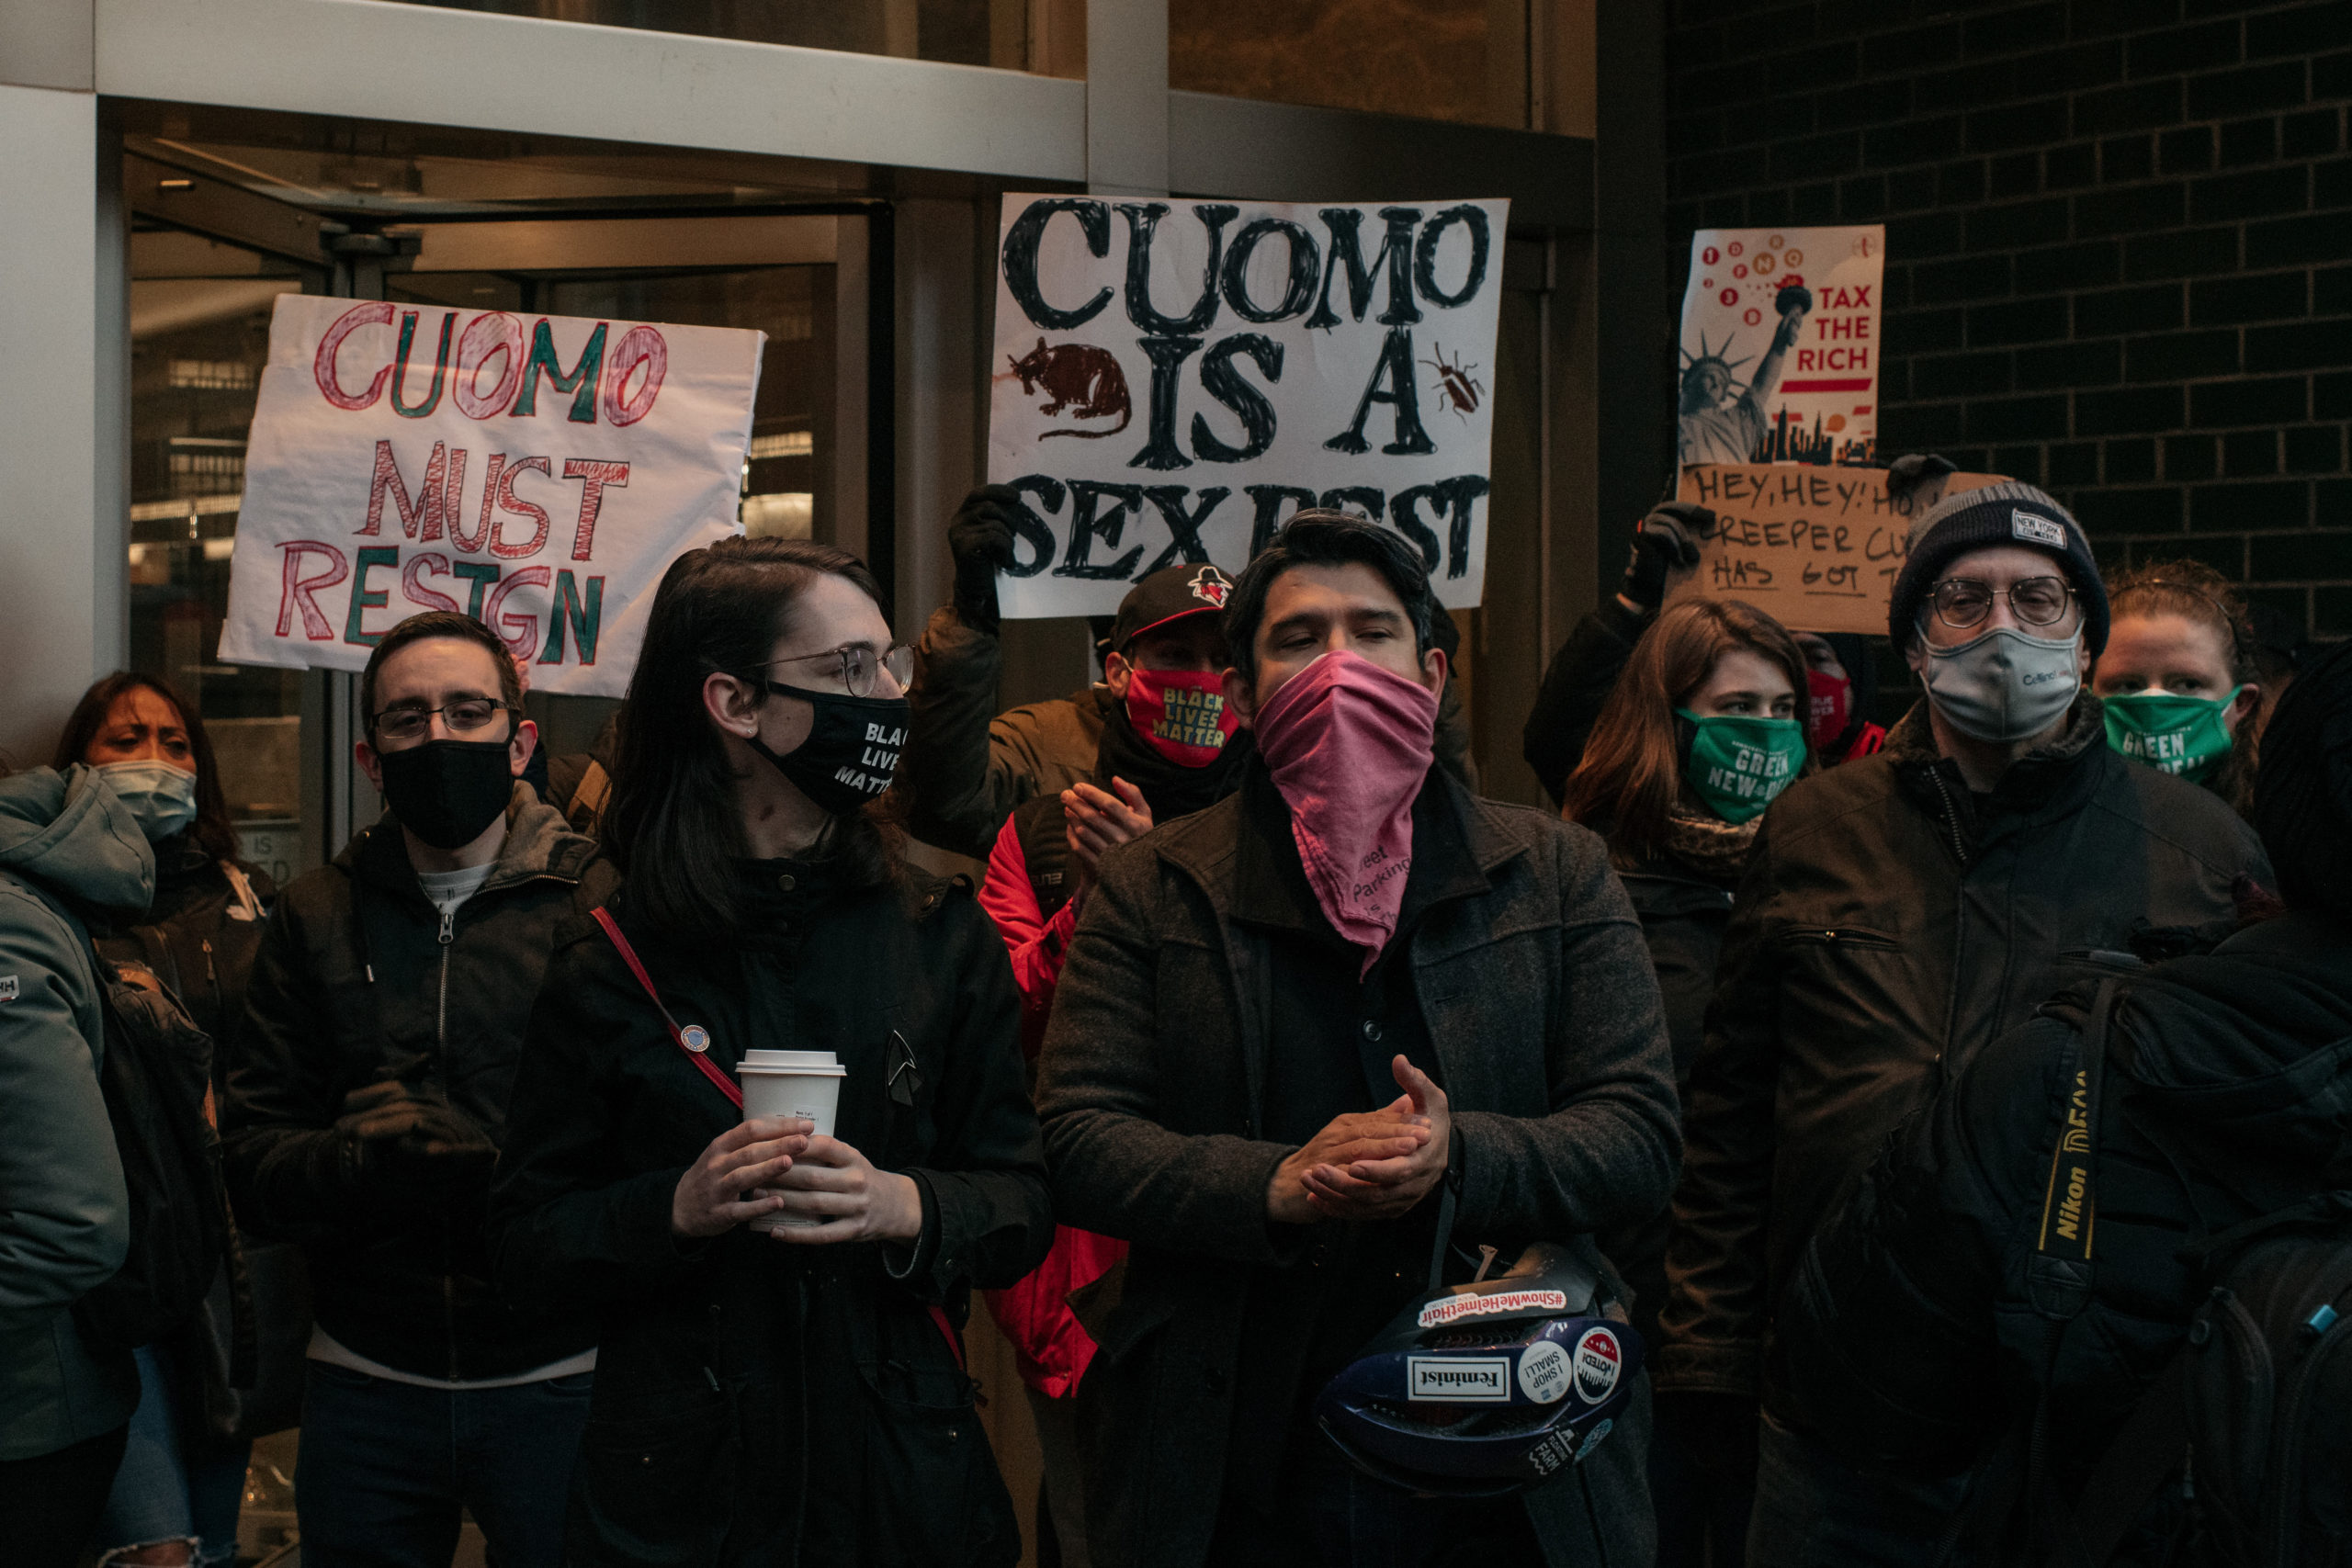 Demonstrators call on New York Gov. Andrew Cuomo to resign at a rally on March 2, 2021 in New York City. (Scott Heins/Getty Images)